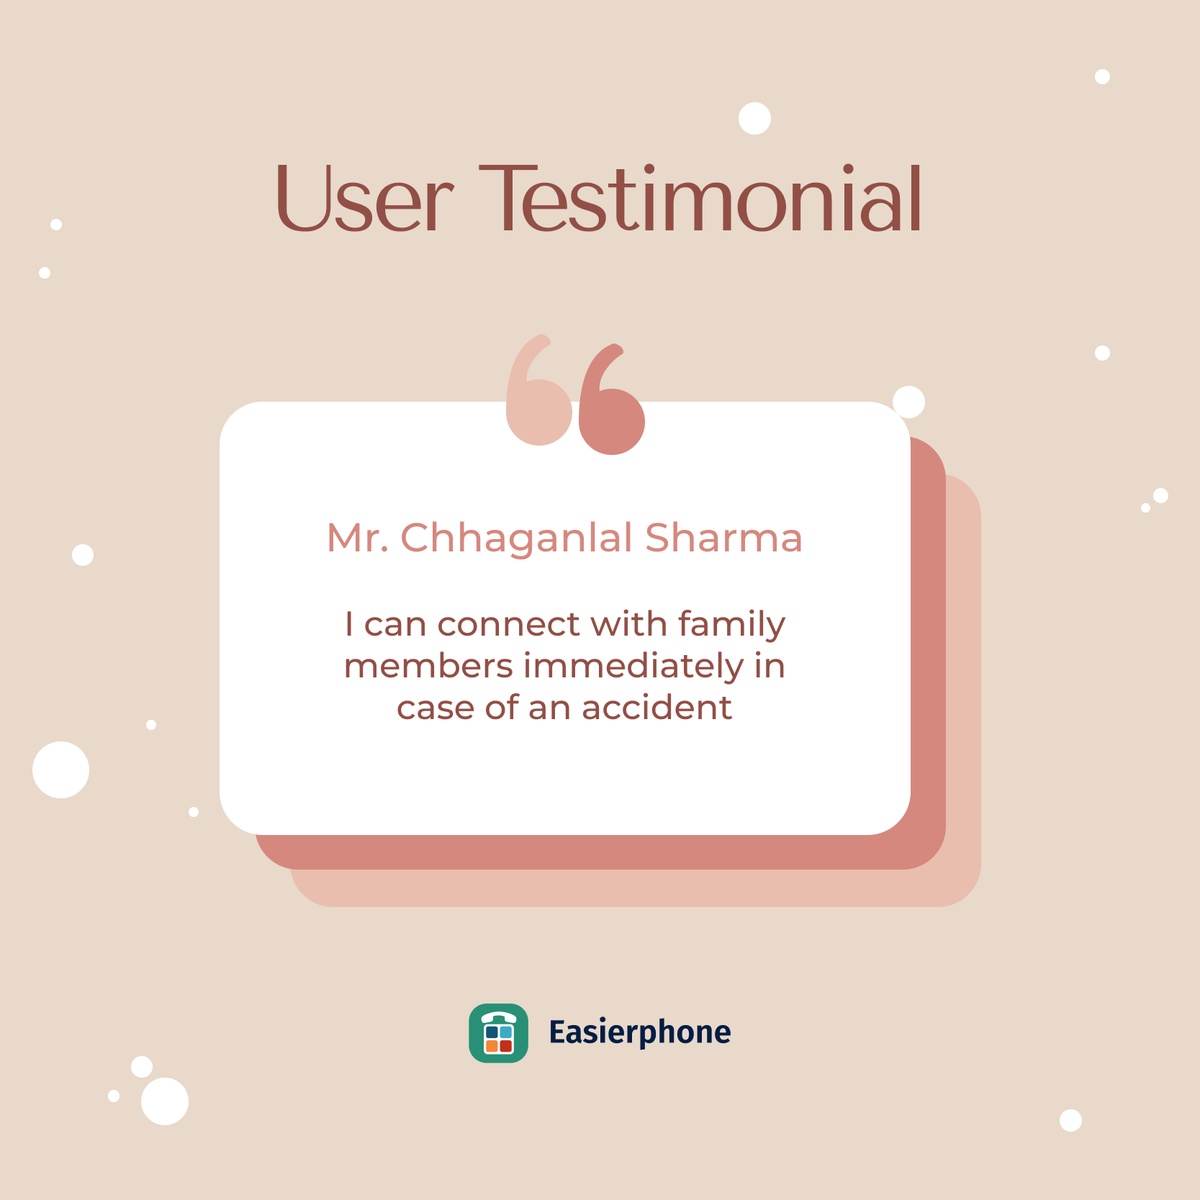 Curious about the value we bring?
See what some of our valued users have shared their experience with us! 💬👇

#UserTestimonials #PositiveFeedback #BestApplication #HealthyAgeing #ThrilledUsers #AmazingFeatures #SeniorCitizens #Reviews #Easierphone